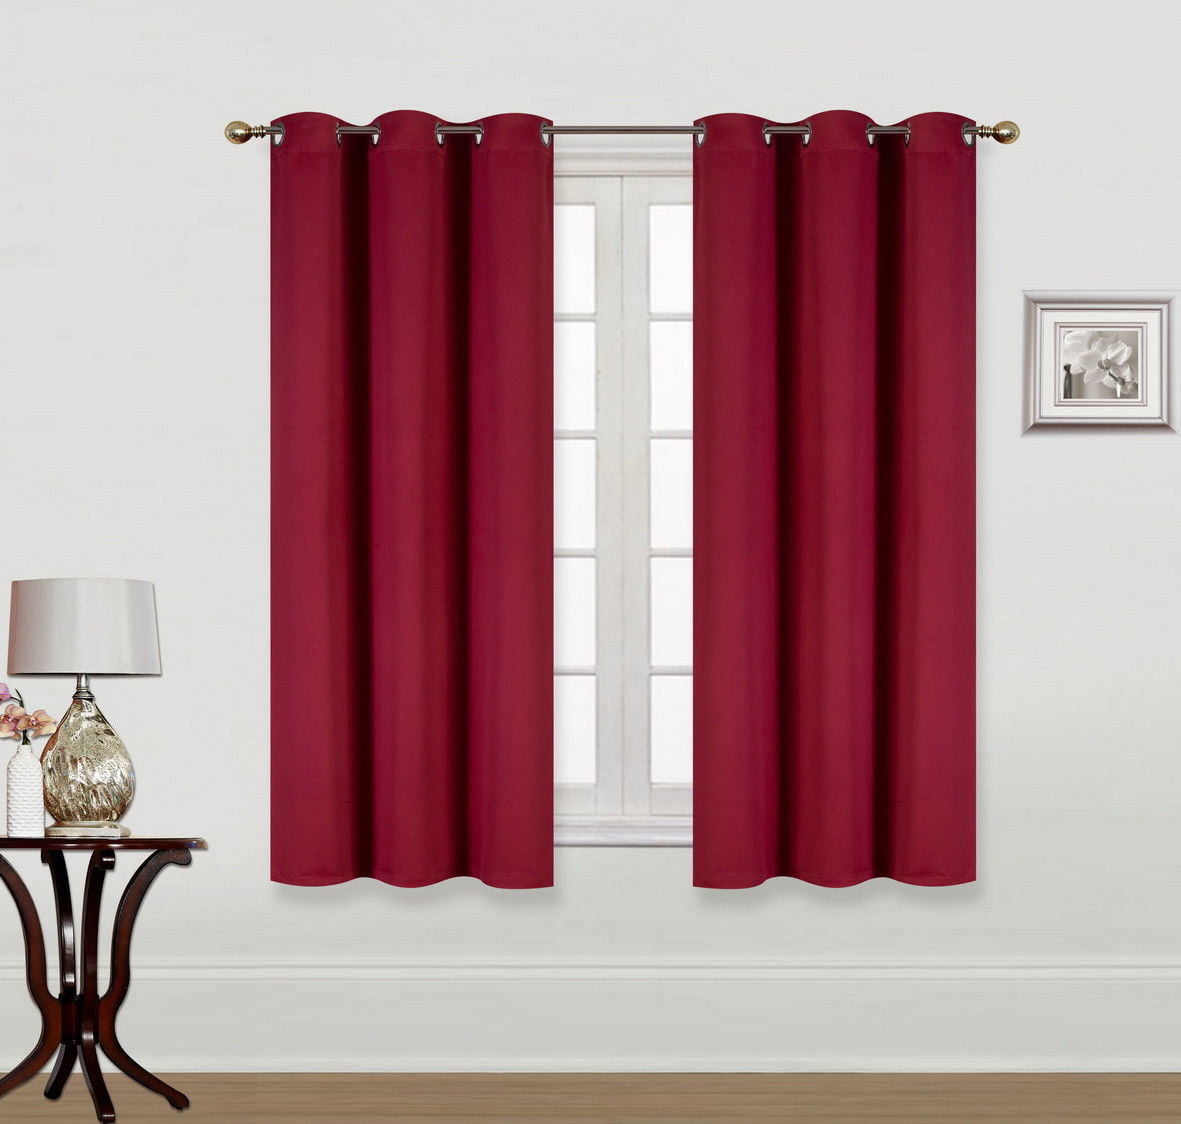 2PC Insulated Foam Lined Heavy Thick Blackout Grommet Window Curtain Panels KK92 